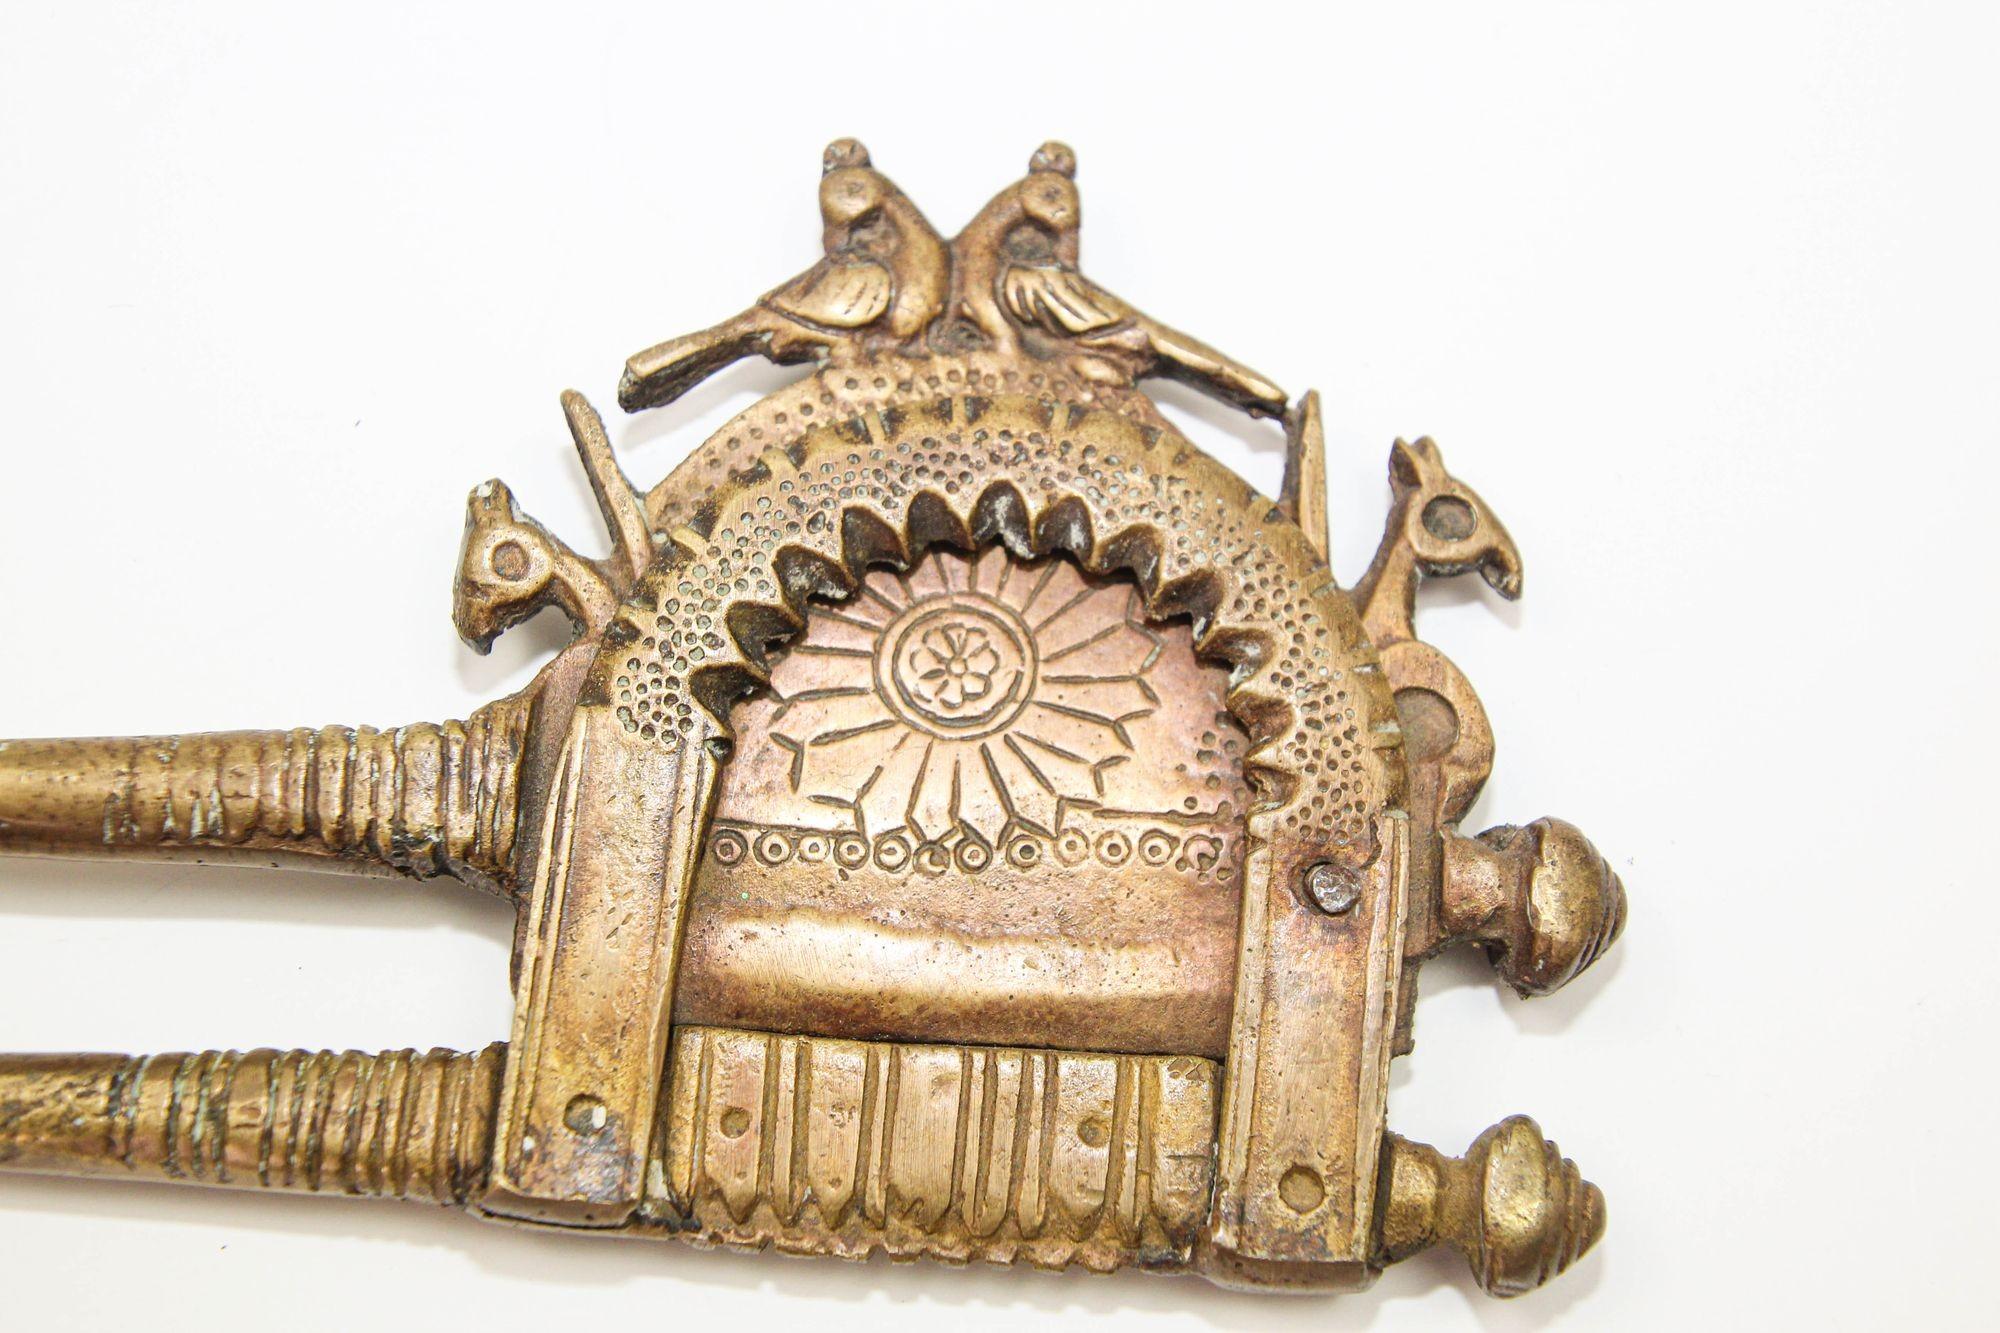 Antique 19th C. Brass Betel Nut Cutter from India Collectible Asian Artifact In Good Condition For Sale In North Hollywood, CA